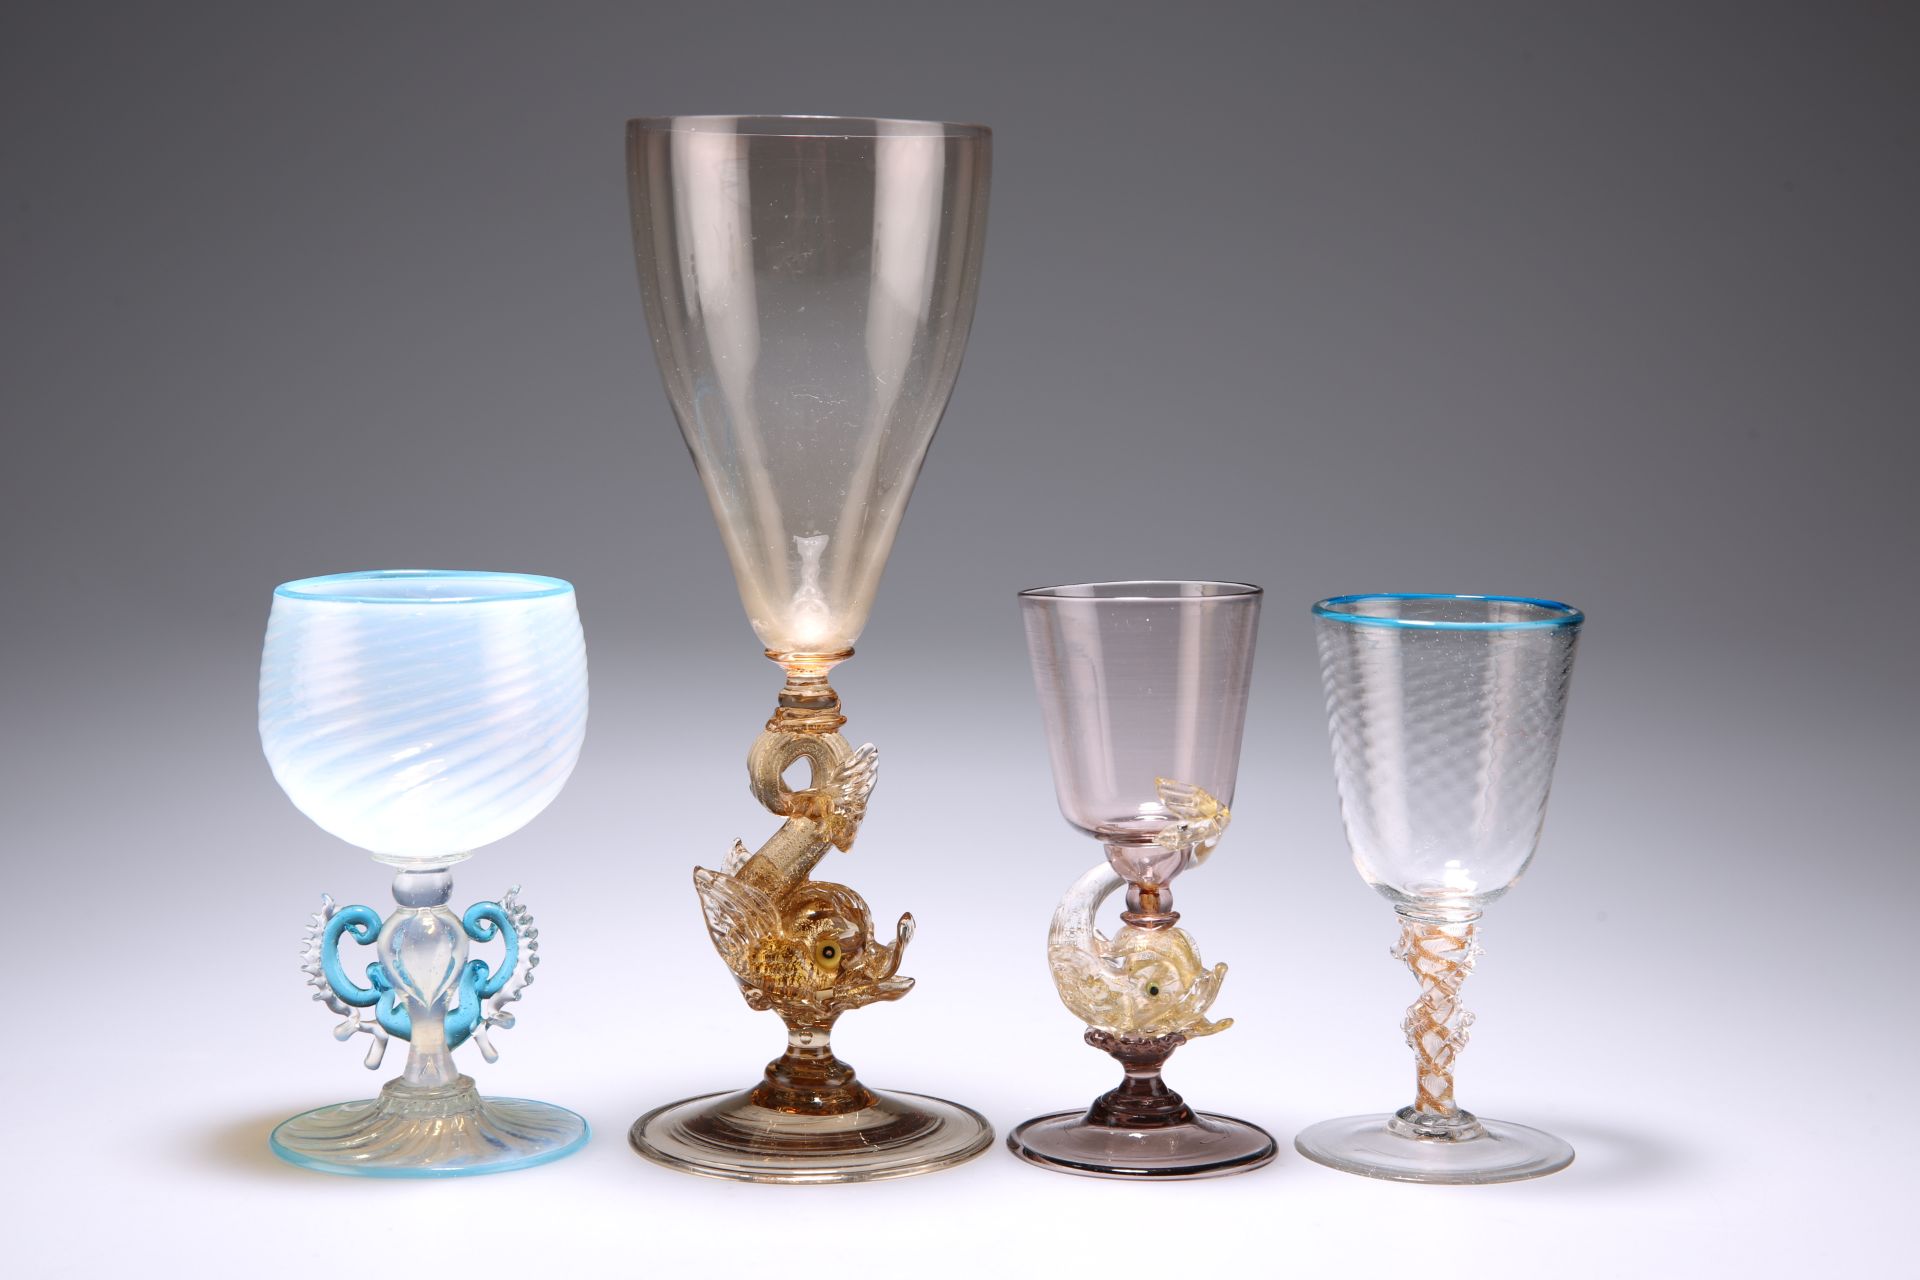 FOUR VENETIAN GLASSES, LATE 19TH / EARLY 20TH CENTURY